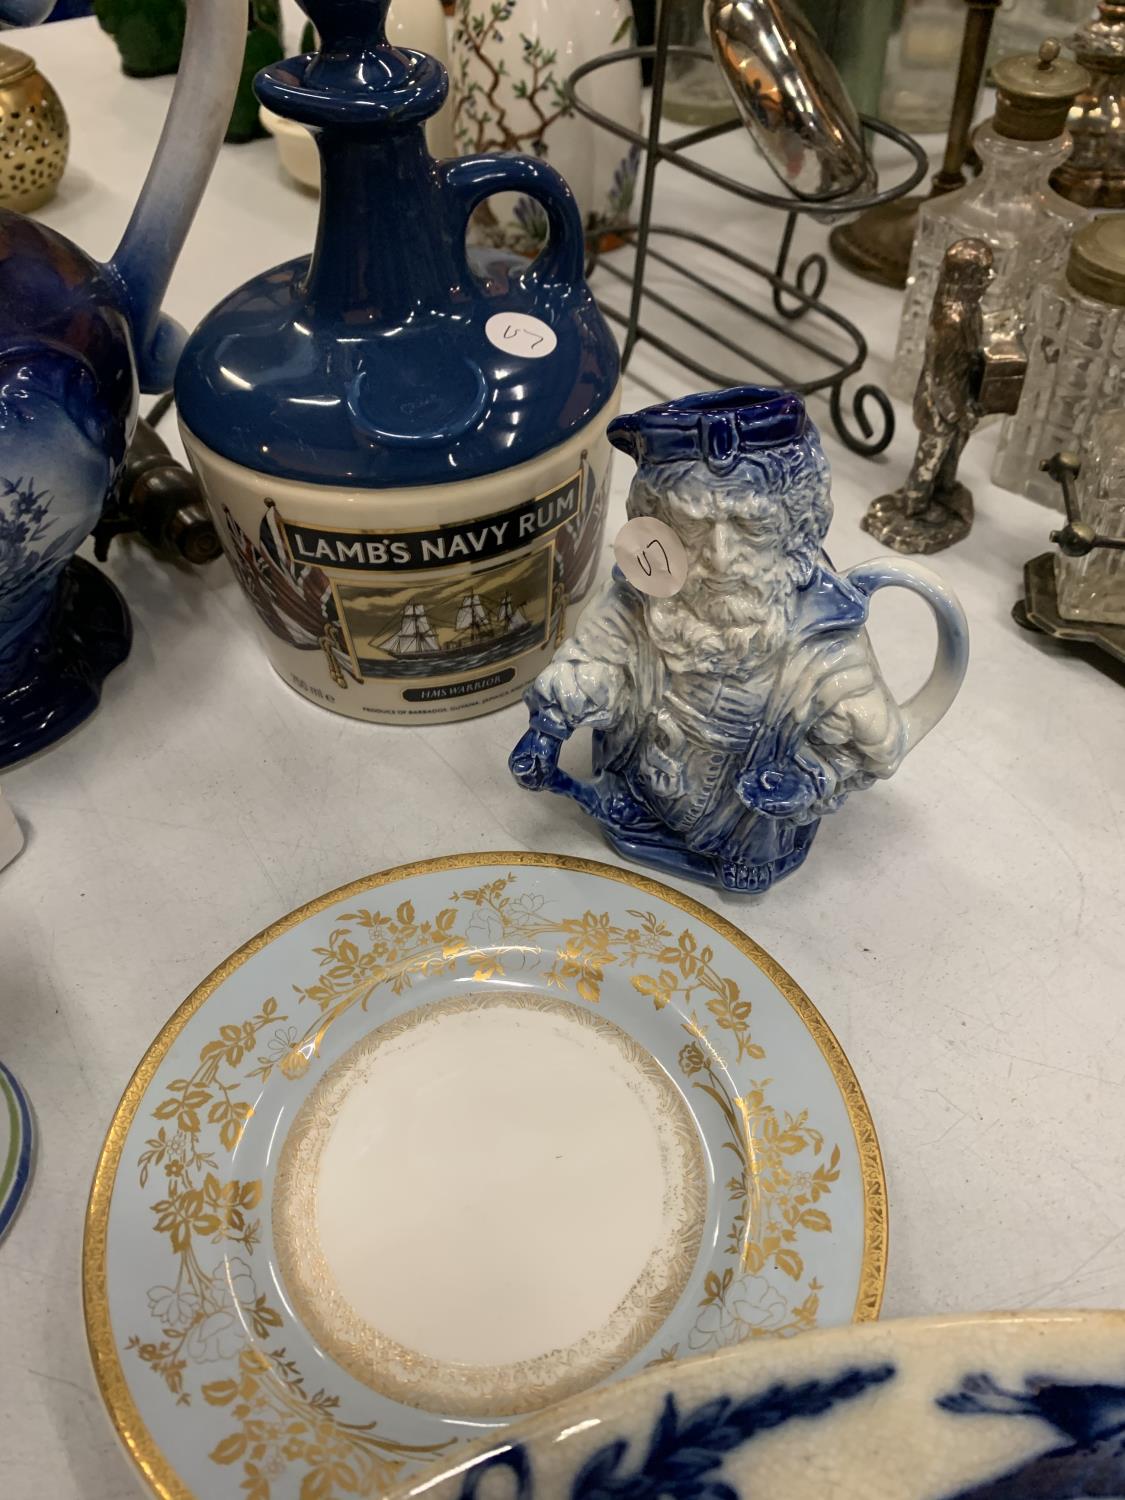 A COLLECTION OF BLUE AND WHITE CERAMIC WARE TO INCLUDE A LARGE JUG, A SERVING PLATTER AND A 'LAMBS - Image 6 of 8